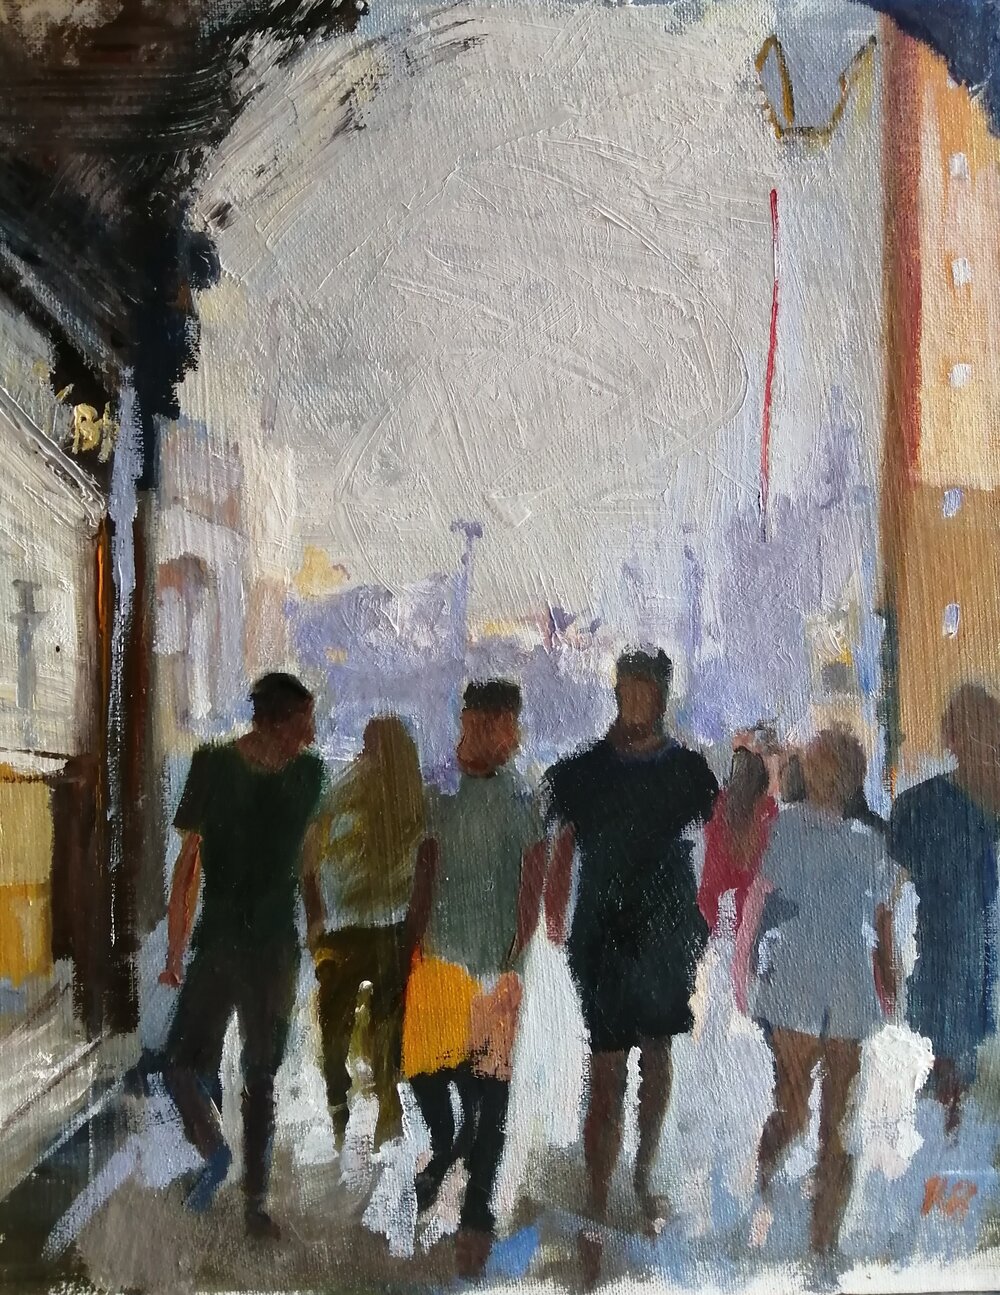  Group dynamic, Venice  2020  Oil on board  30x40cms  £395  As the title suggests, a group dynamic passing through an archway from St Mark’s square. Painted with quick, expressive brushstrokes. 